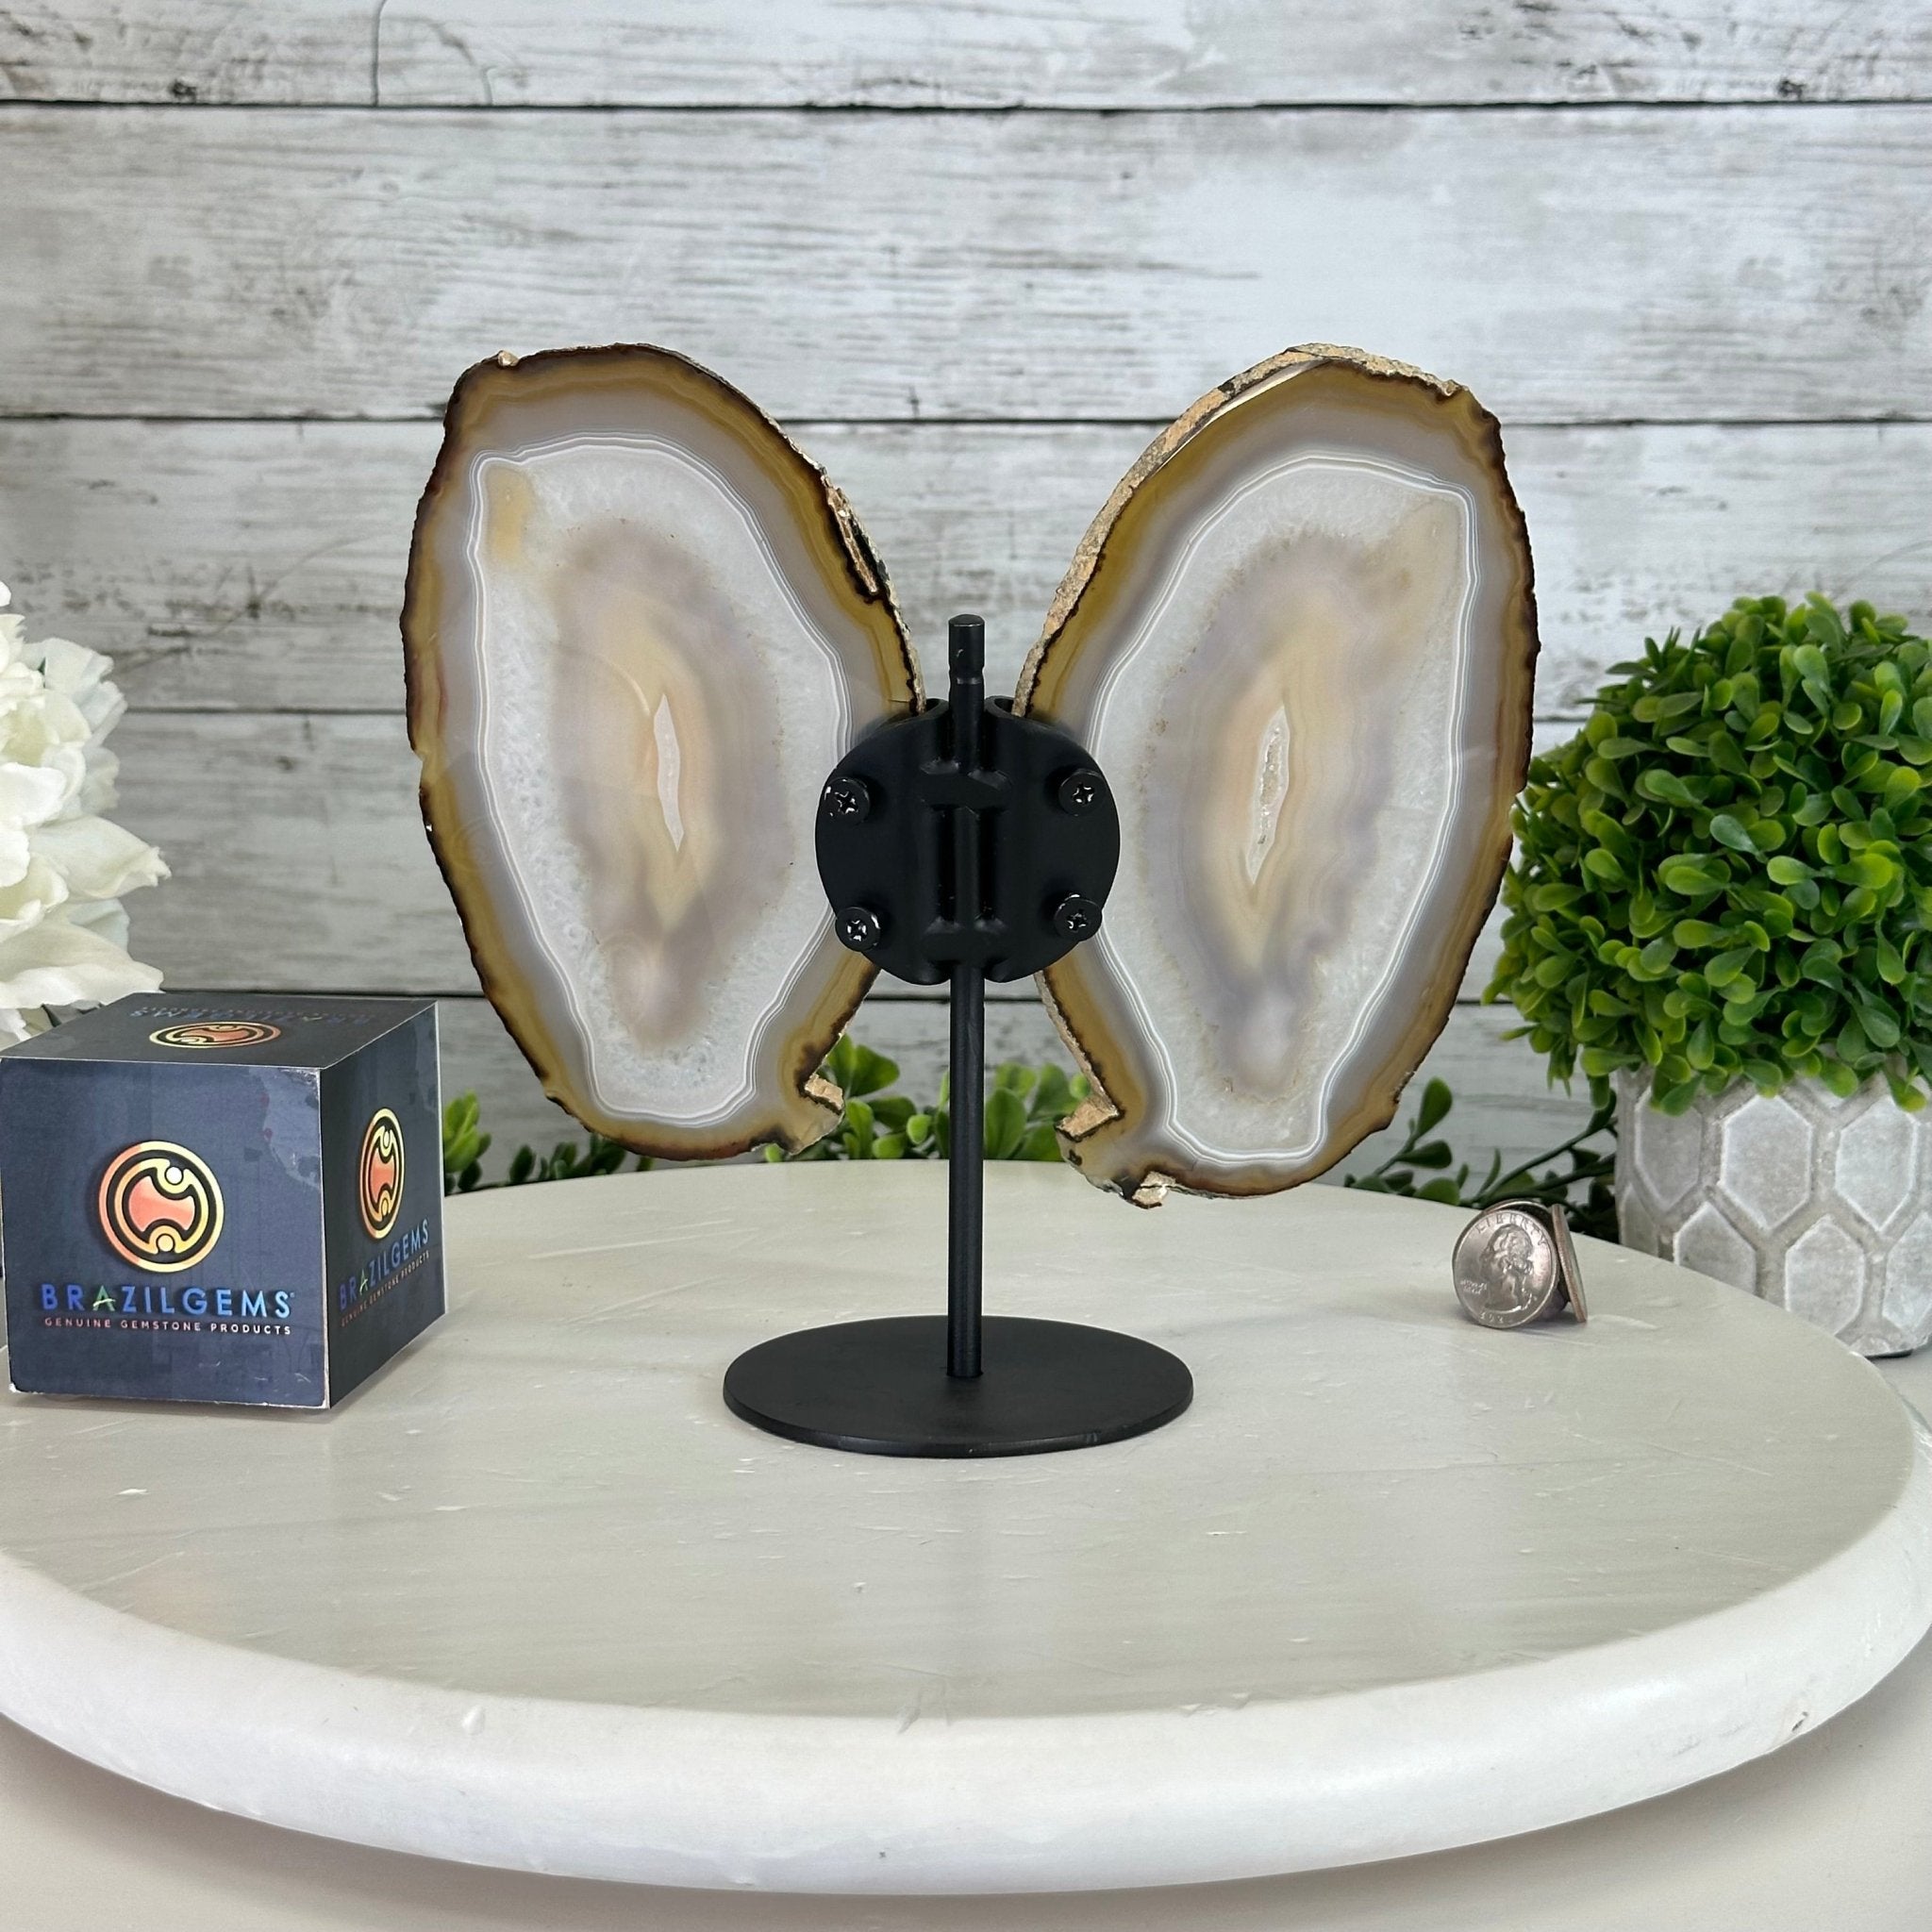 Natural Brazilian Agate "Butterfly Wings", 8" Tall #5050NA-146 - Brazil GemsBrazil GemsNatural Brazilian Agate "Butterfly Wings", 8" Tall #5050NA-146Agate Butterfly Wings5050NA-146